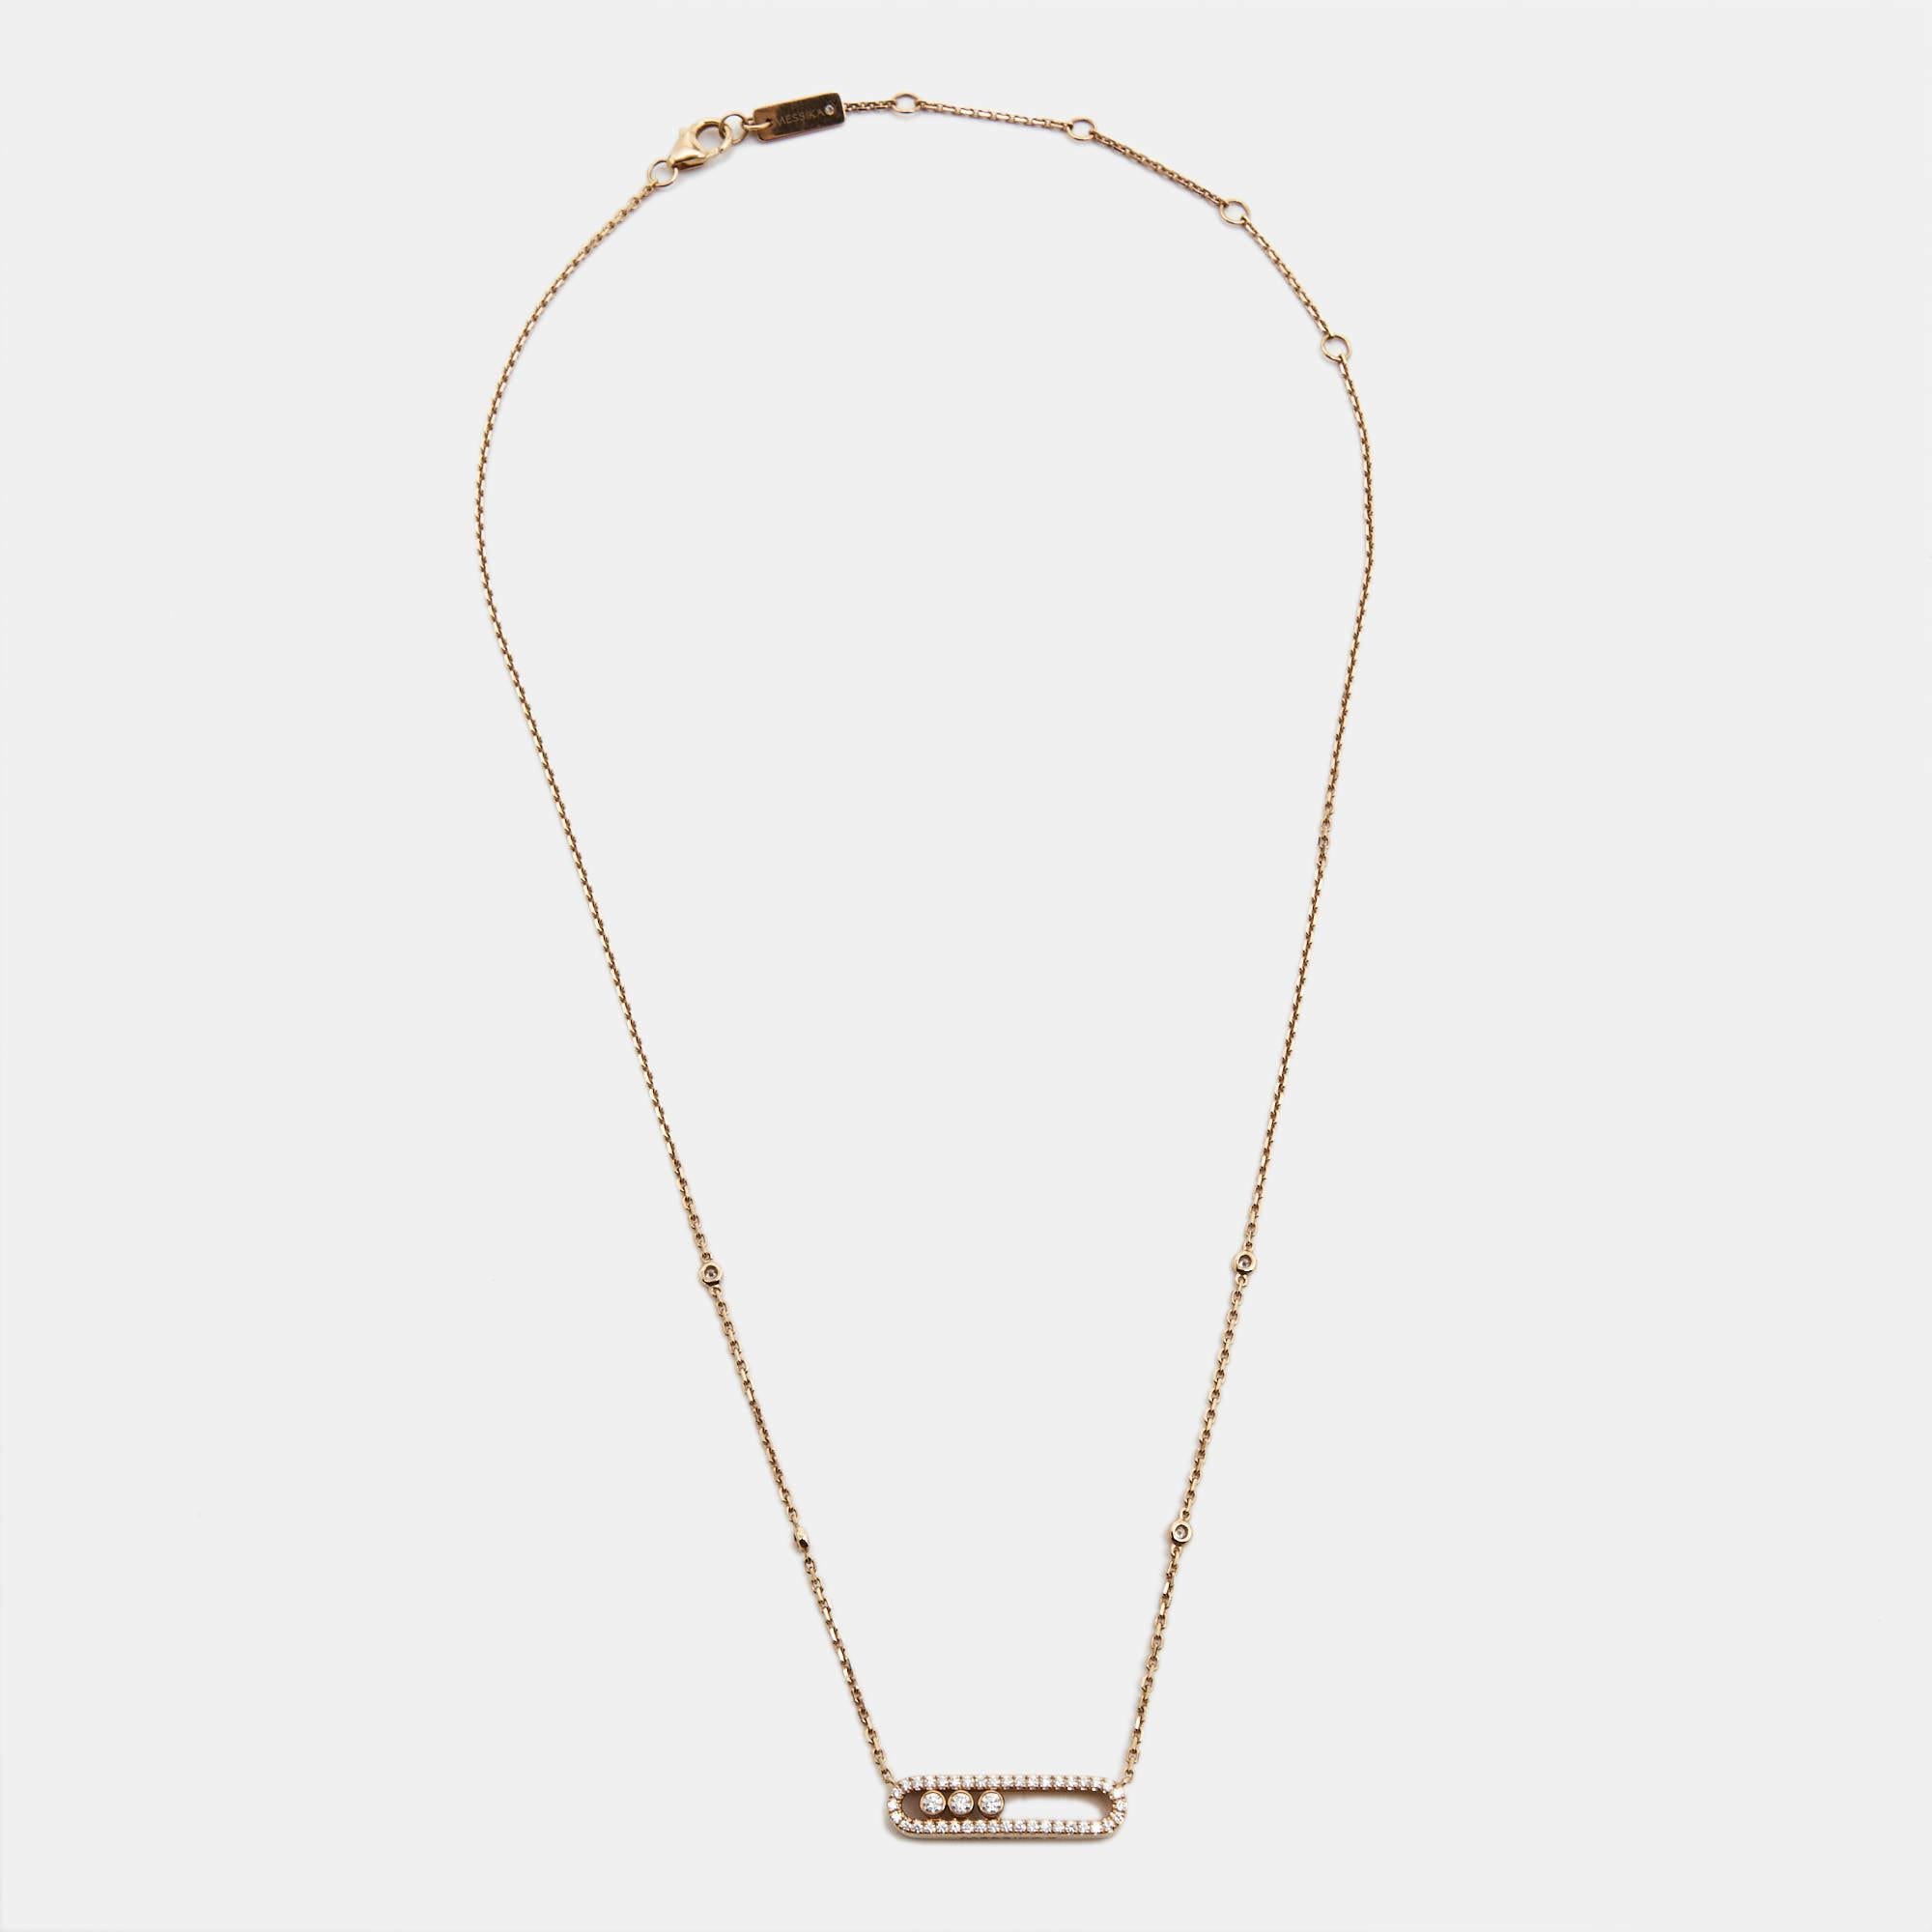 The Move collection has designs that are both wearable and timeless. This wondrous thing of beauty is the Baby Move necklace, handmade using 18k rose gold. It has a chain to hold the diamond-encrusted cage. Within the signature cage, three diamonds